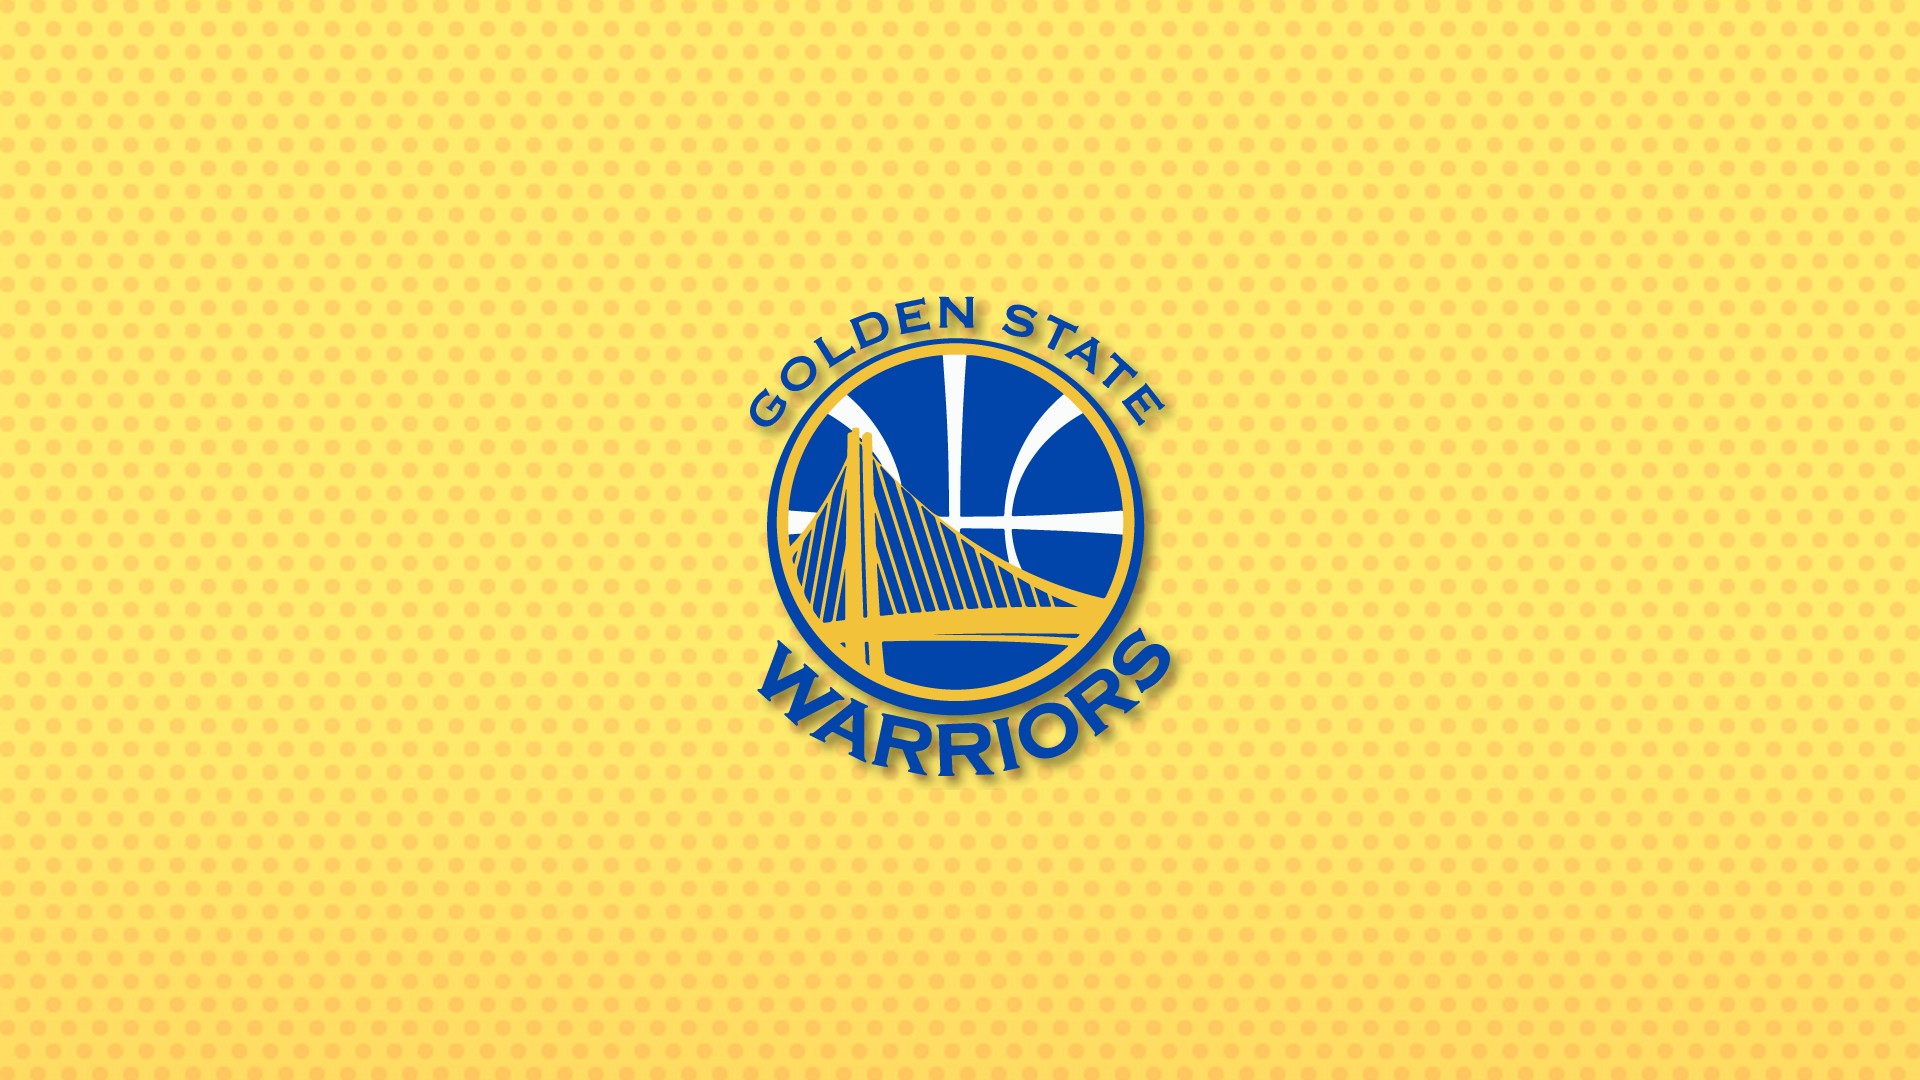 HD Wallpaper Golden State Warriors With Resolution 1920X1080 pixel. You can make this wallpaper for your Desktop Computer Backgrounds, Mac Wallpapers, Android Lock screen or iPhone Screensavers